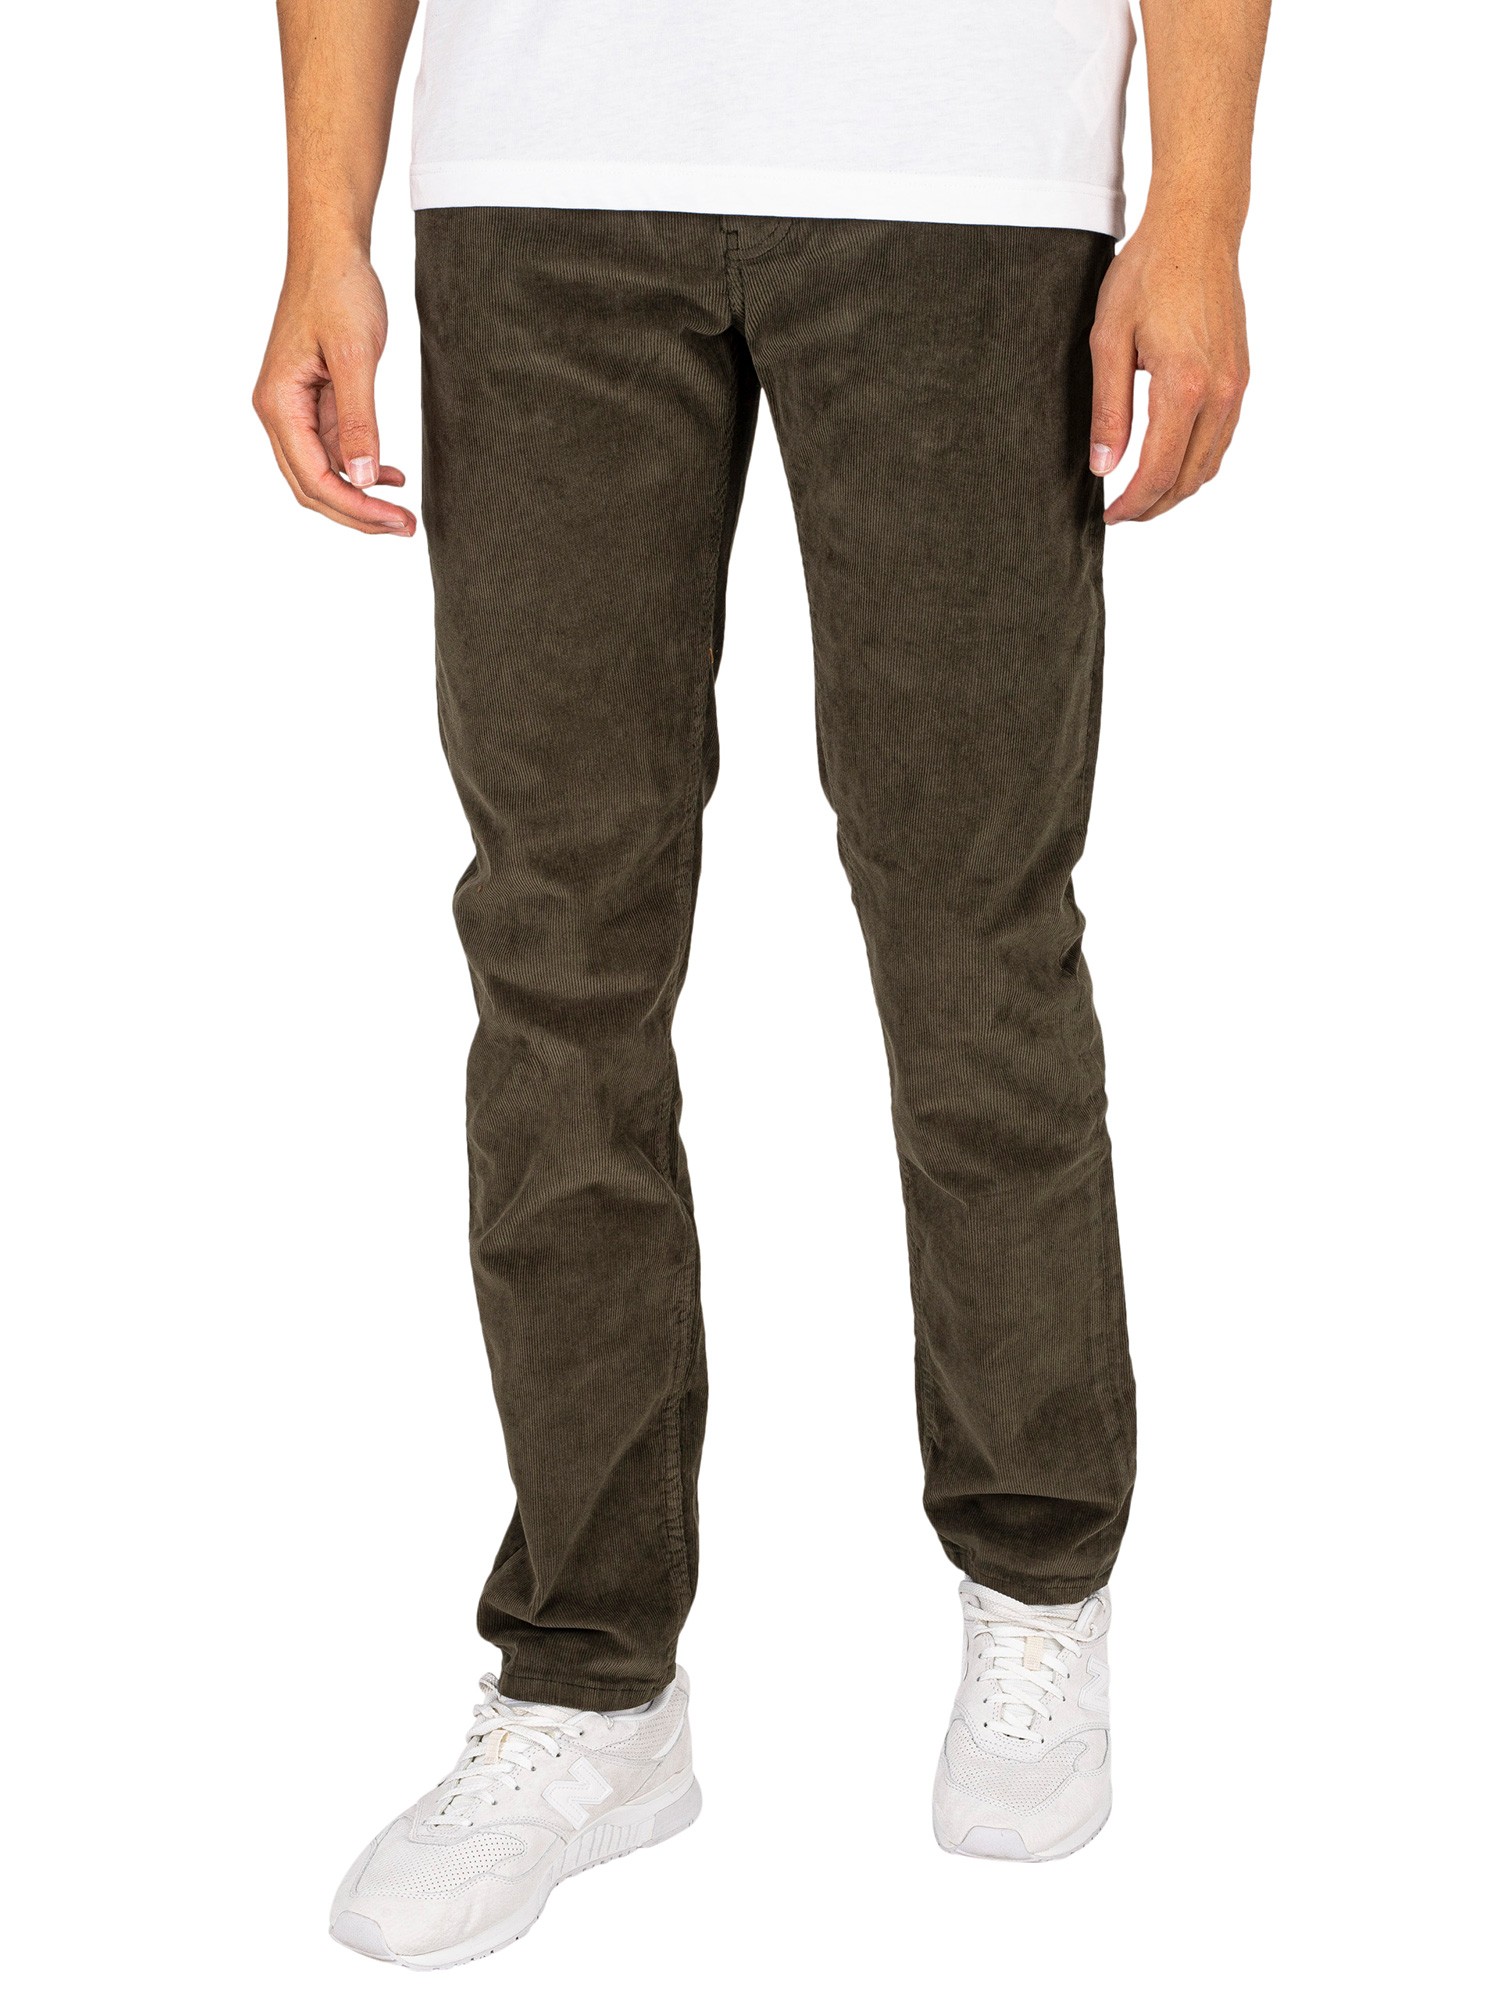 Lois Jeans Sierra Thin Corduroy Trousers - Green Olive | Standout